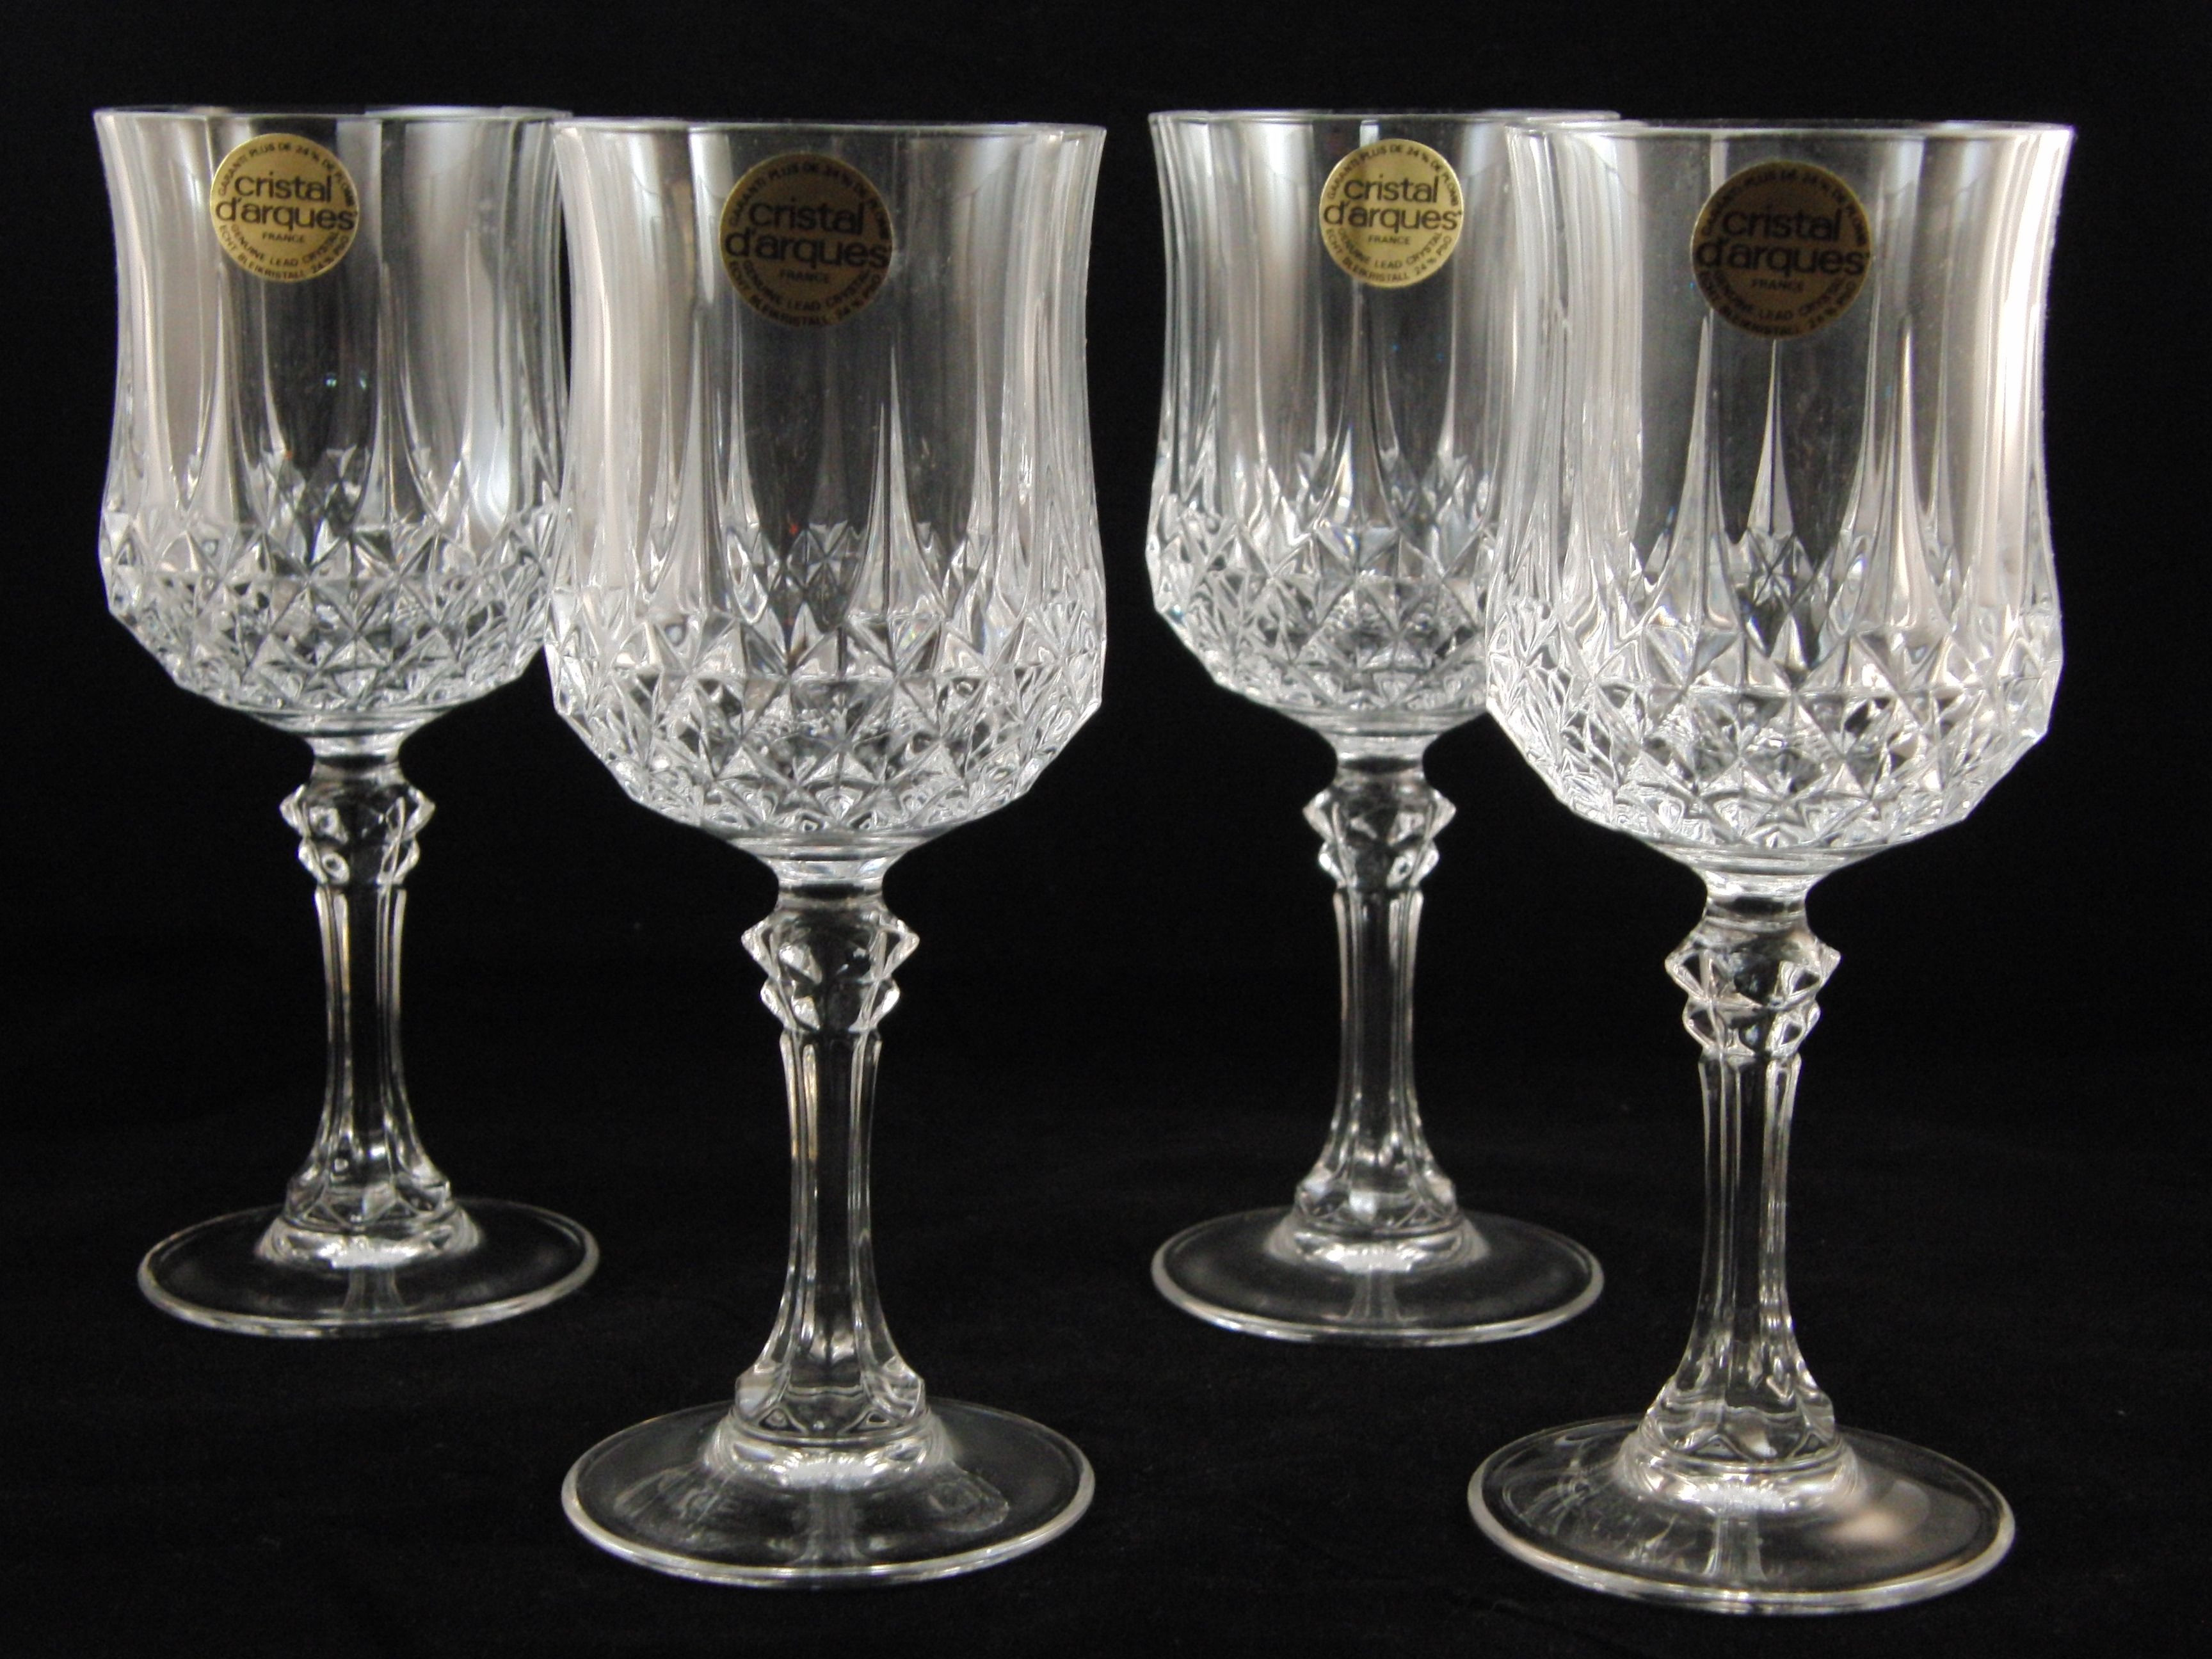 19 Awesome Cristal D Arques Vase France 2024 free download cristal d arques vase france of genuine lead crystal 4 longchamp glasses wine glasses by crystal d with genuine lead crystal 4 longchamp glasses wine glasses by crystal darques made